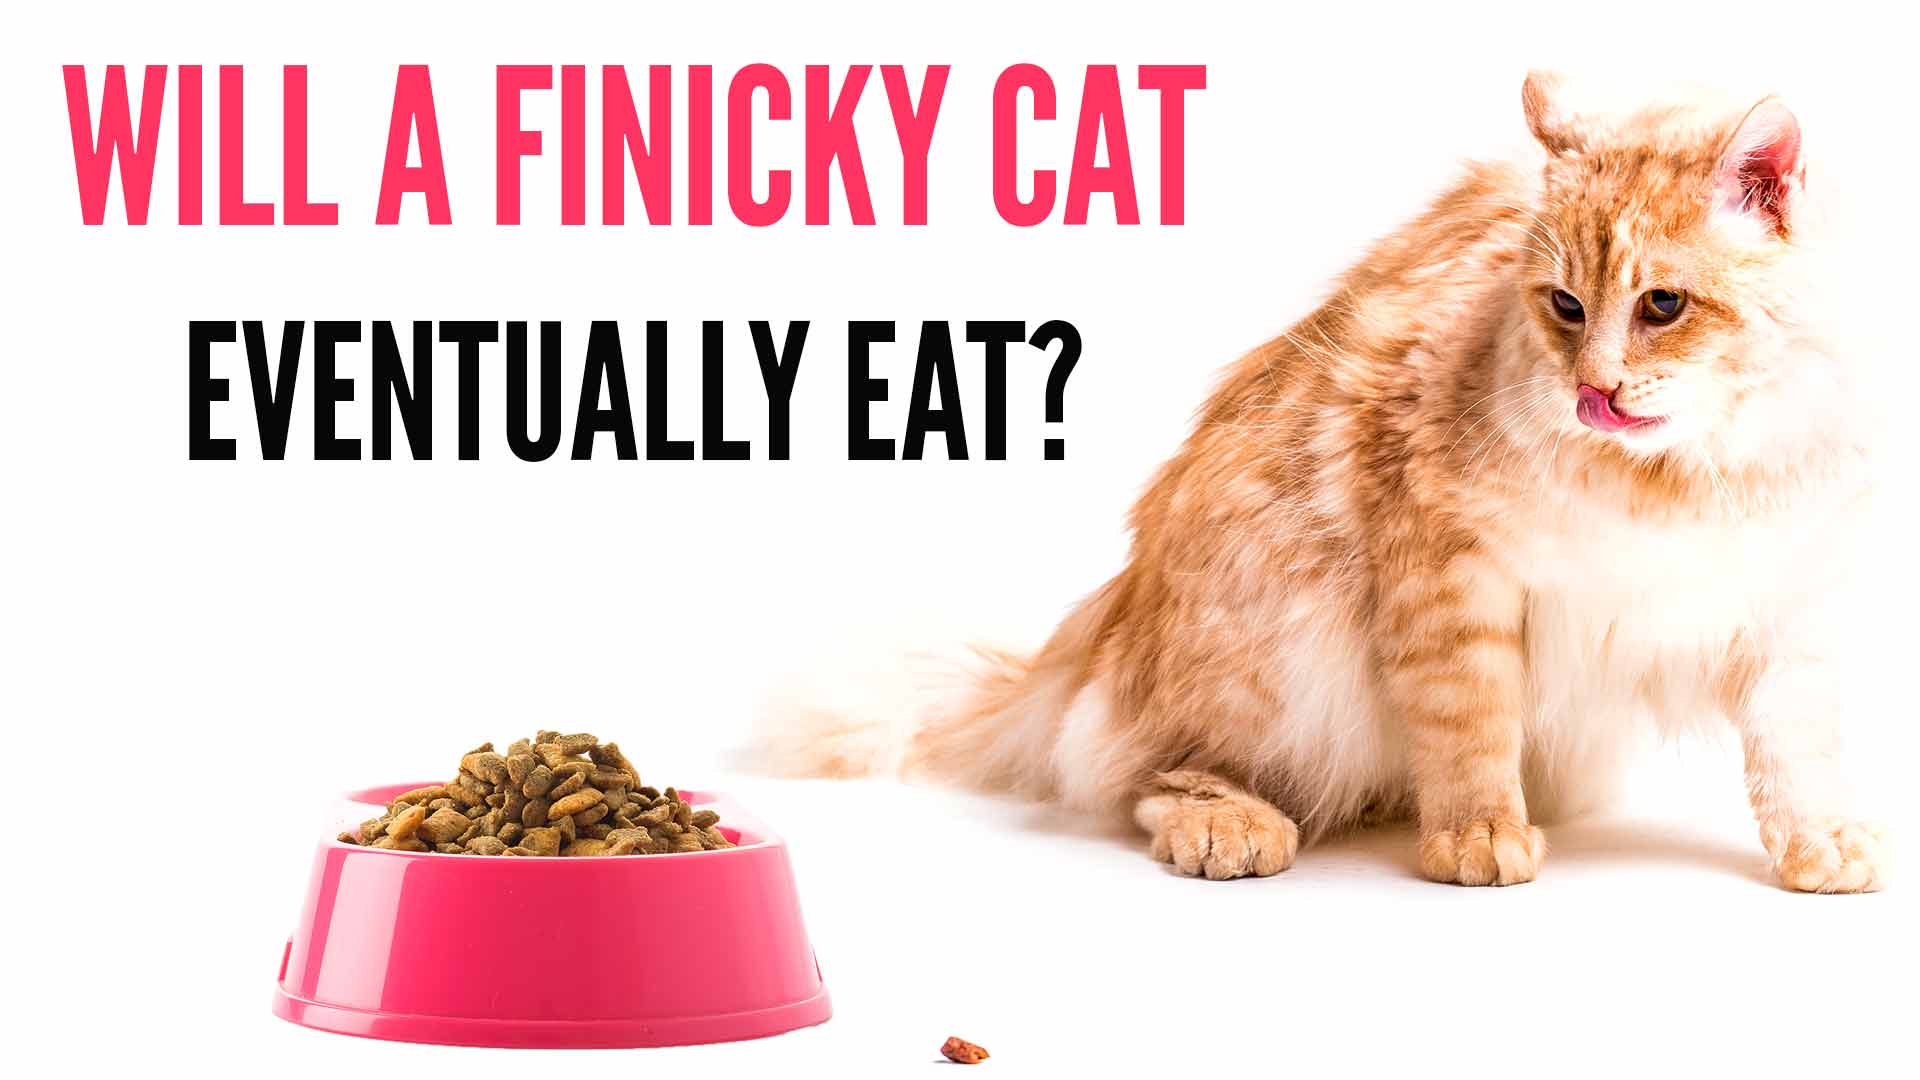 Will A Finicky Cat Eventually Eat?